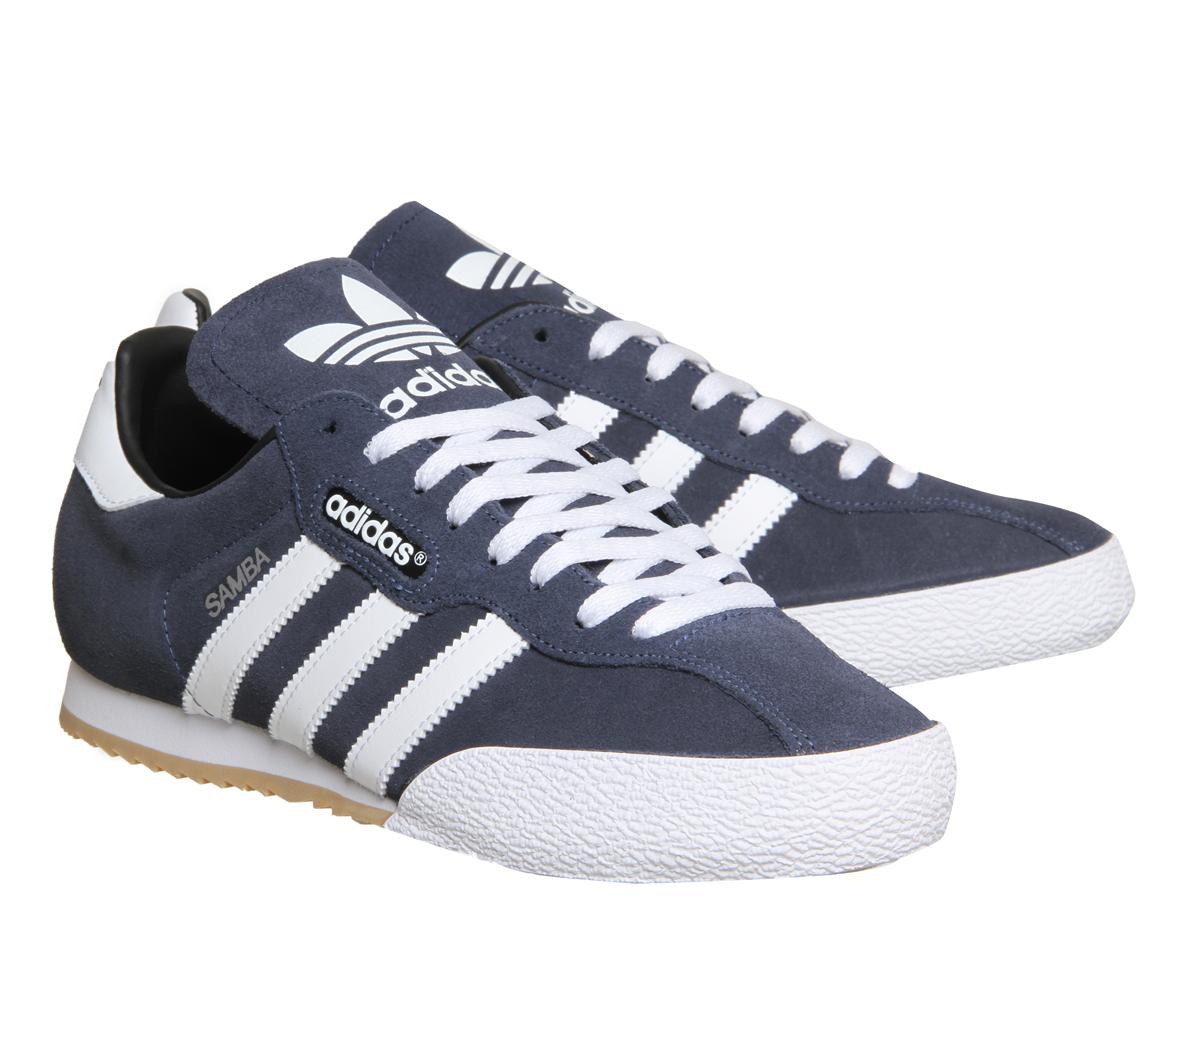 adidas Samba Super Suede Low-Top Sneakers in Navy (Blue) for Men - Lyst